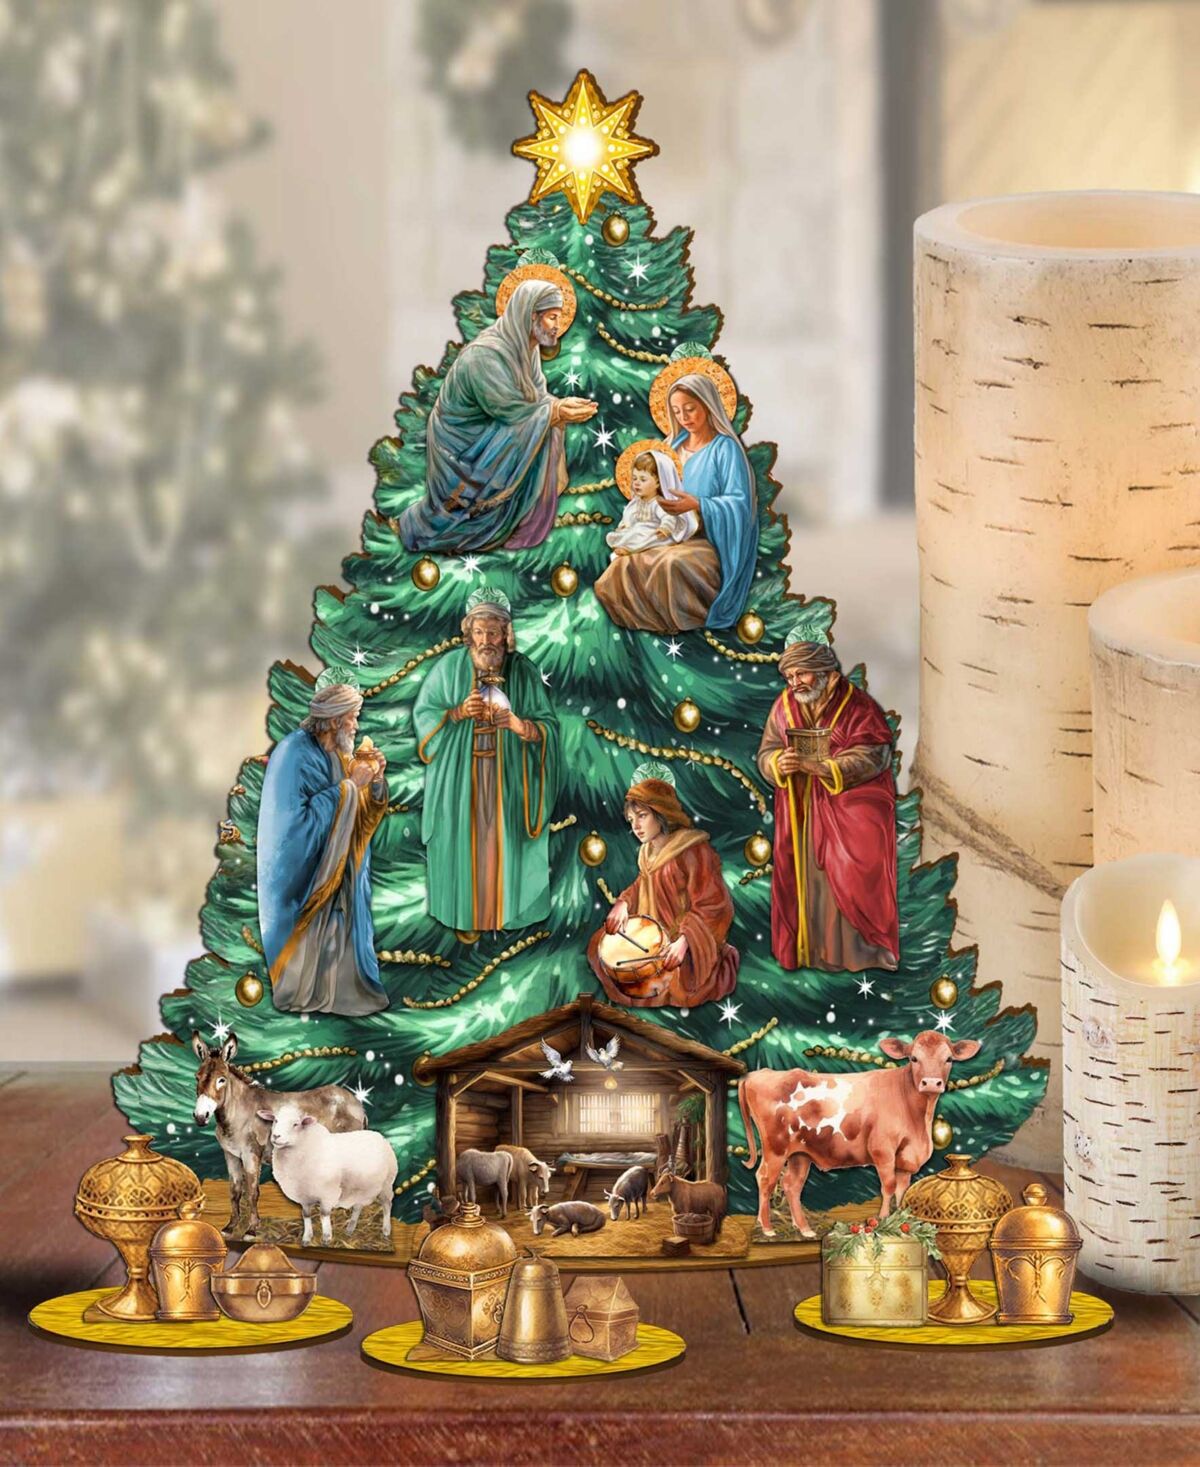 Designocracy Holy Gifts Nativity-Themed Collectible Tabletop Christmas Tree by G.DeBrekht - Multi Color